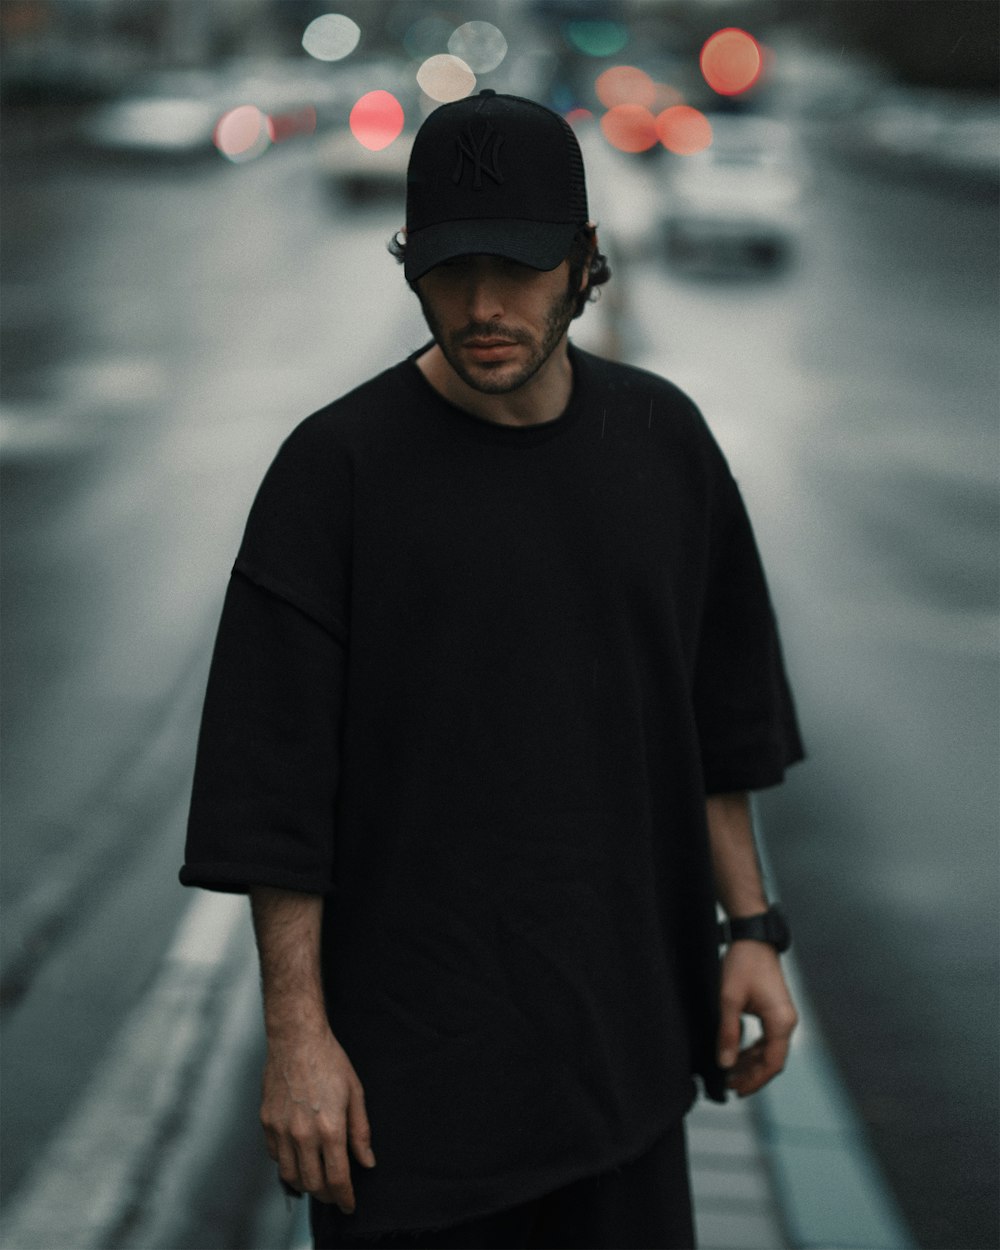 man in black crew neck t-shirt and black fitted cap standing on gray concrete pavement